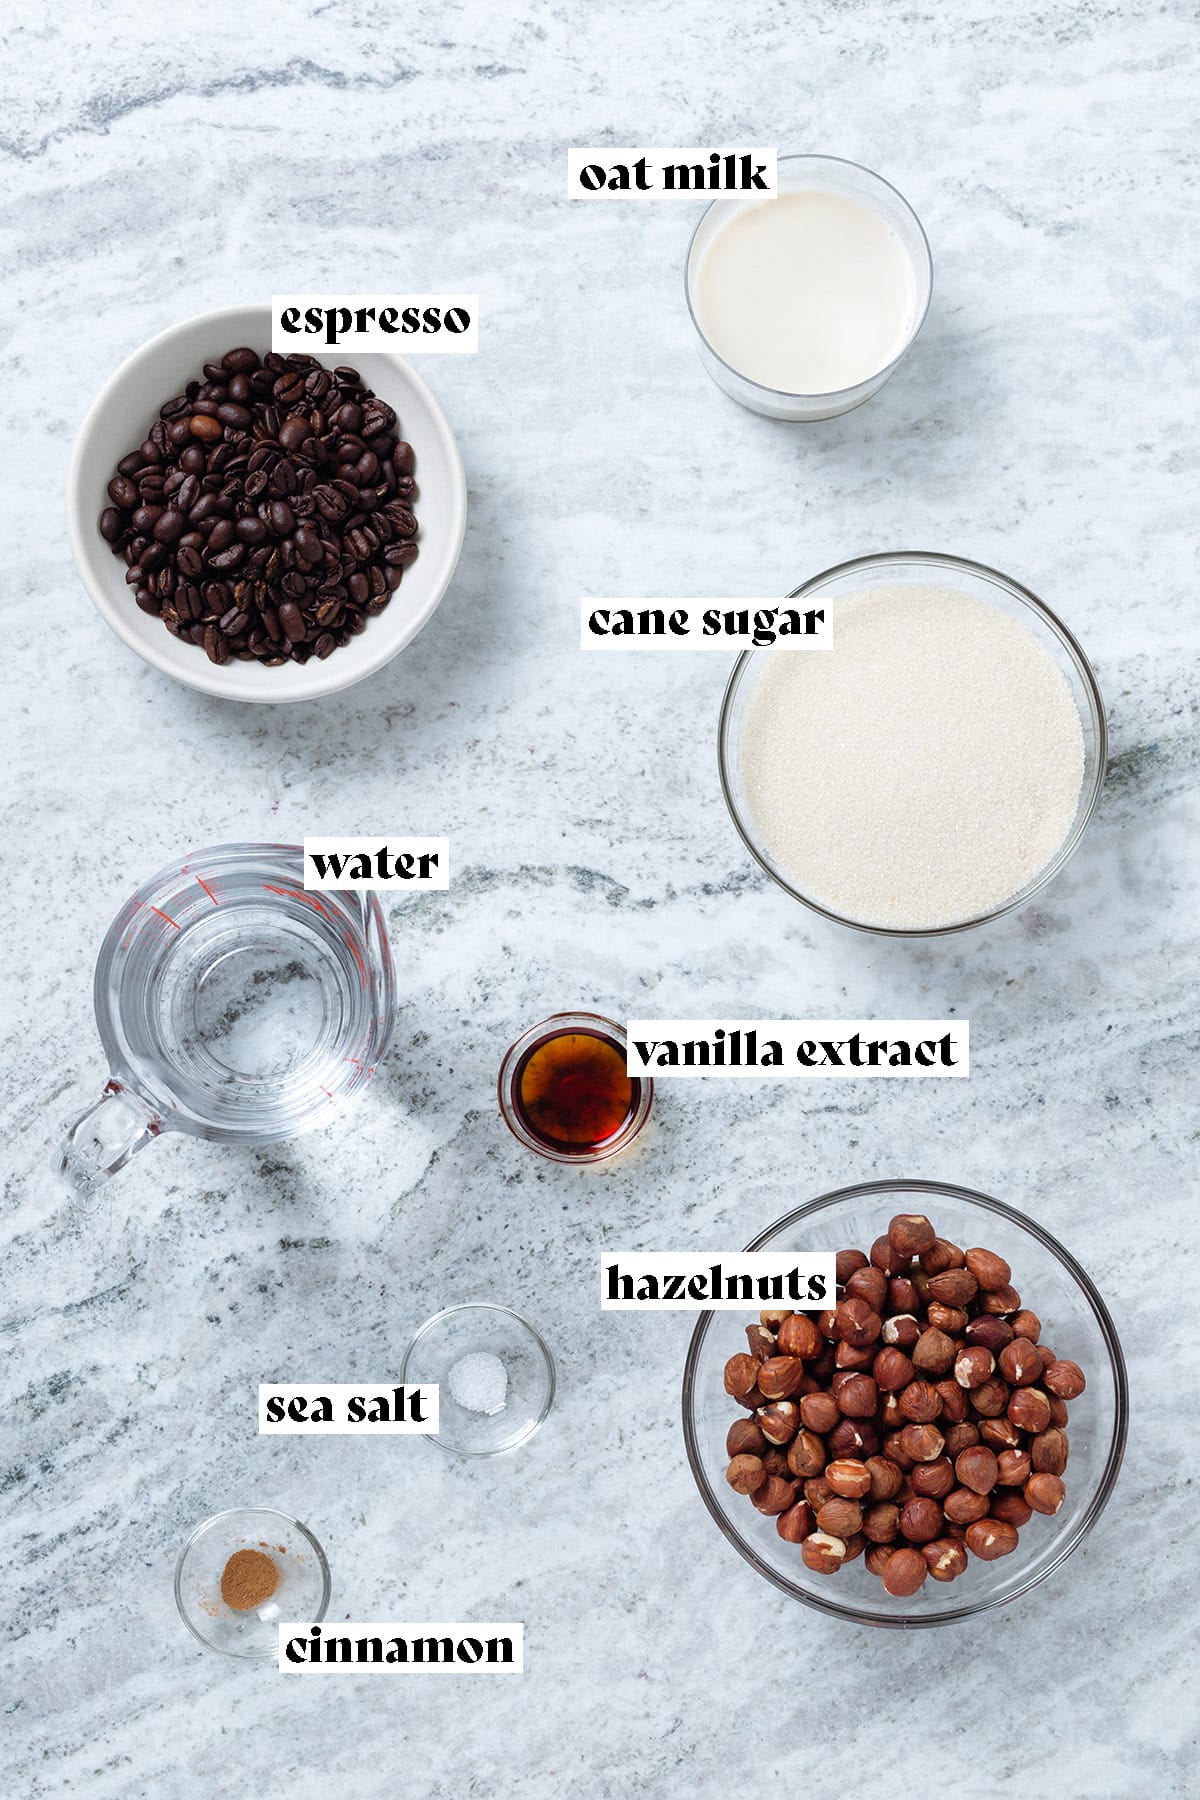 Ingredients for iced hazelnut latte like hazelnuts, coffee beans, and milk laid out on a stone background.